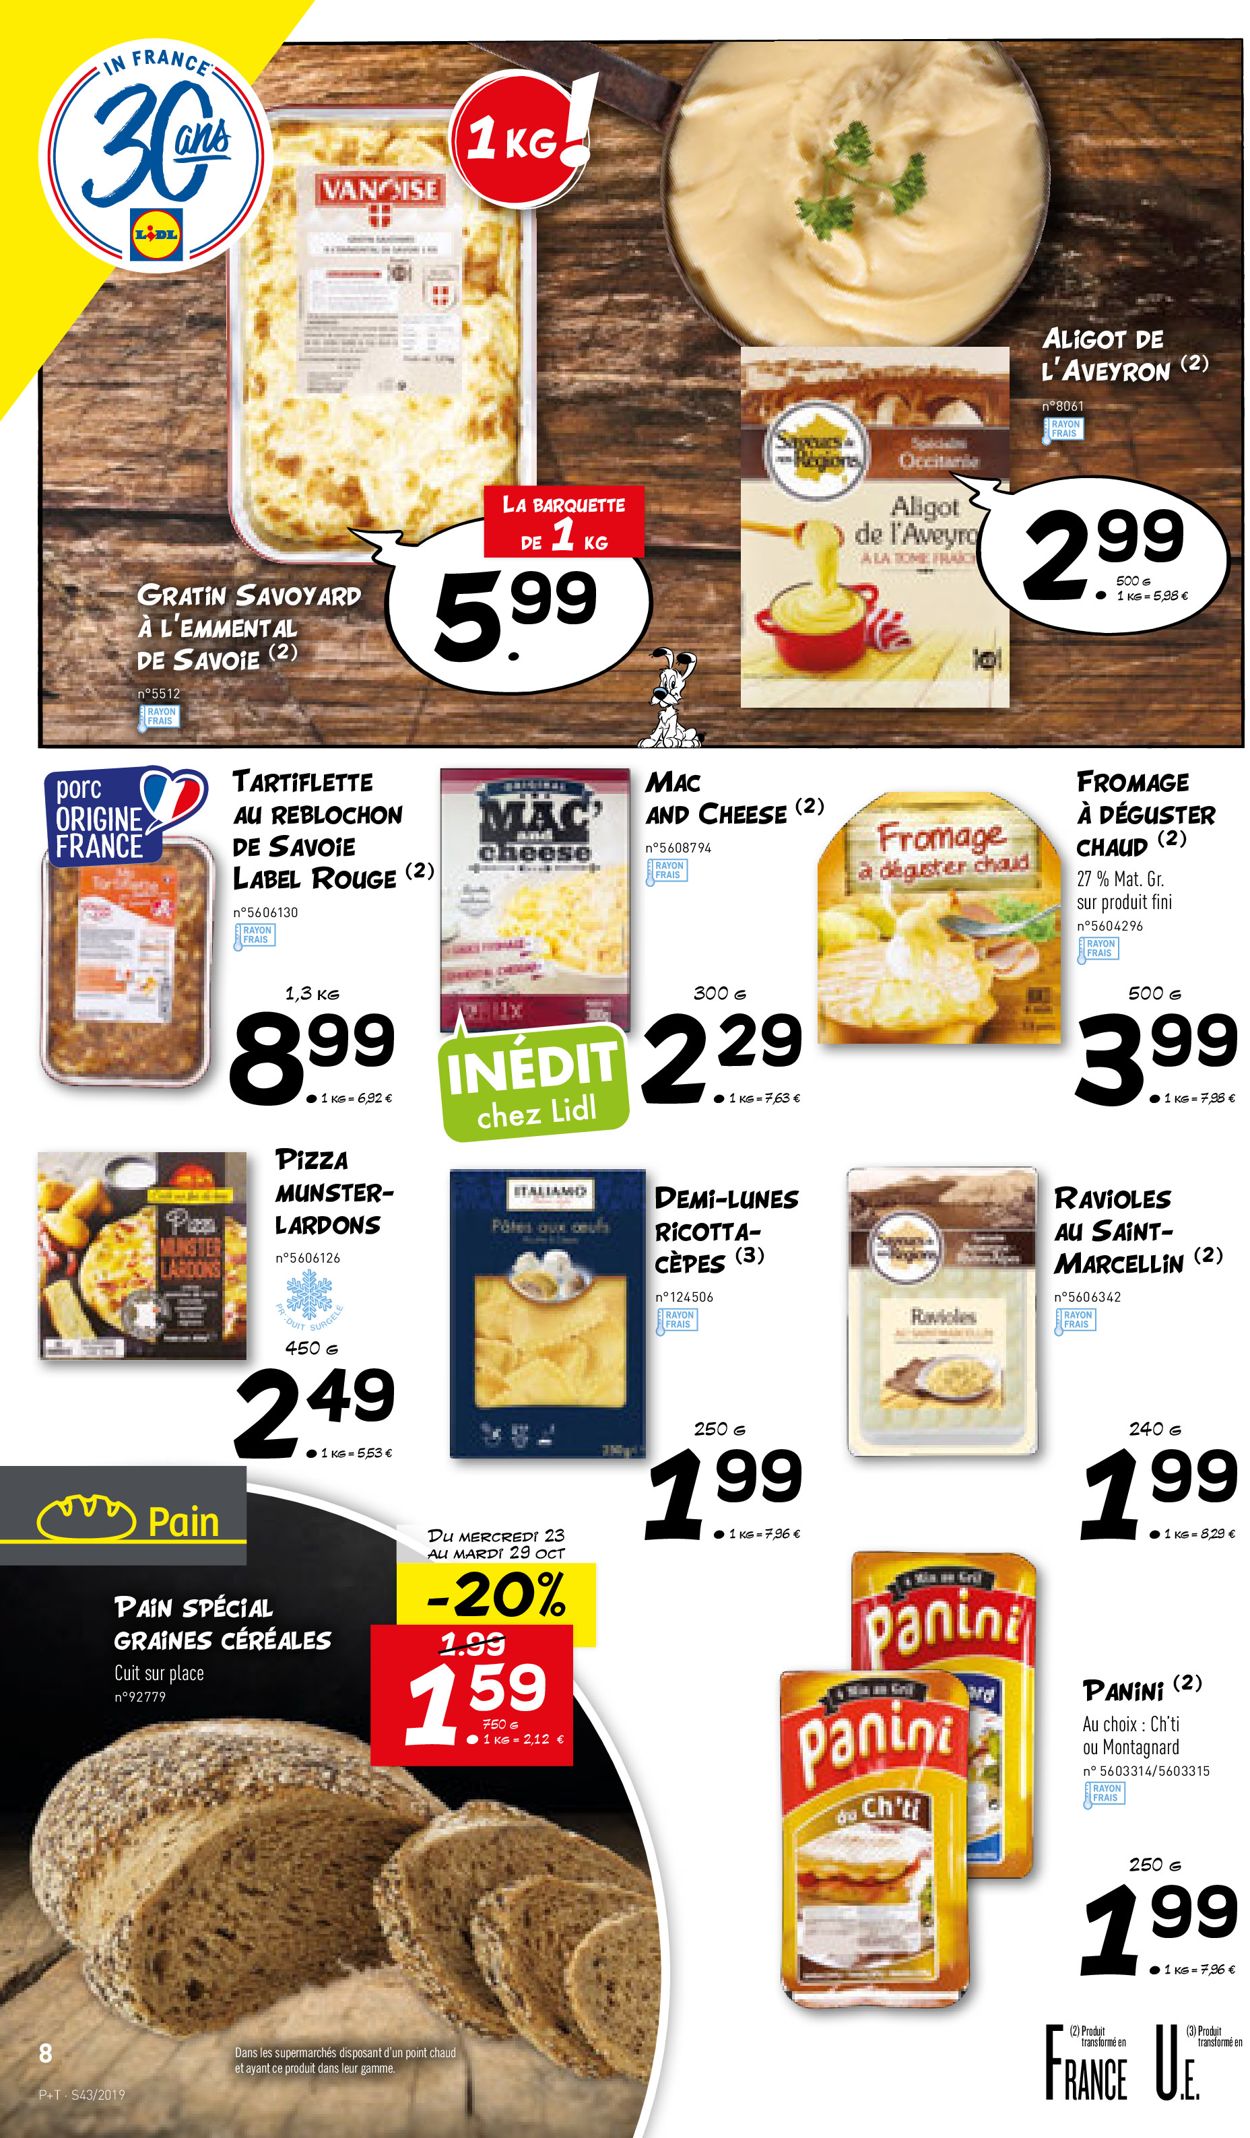 Lidl Catalogue - 23.10-29.10.2019 (Page 8)